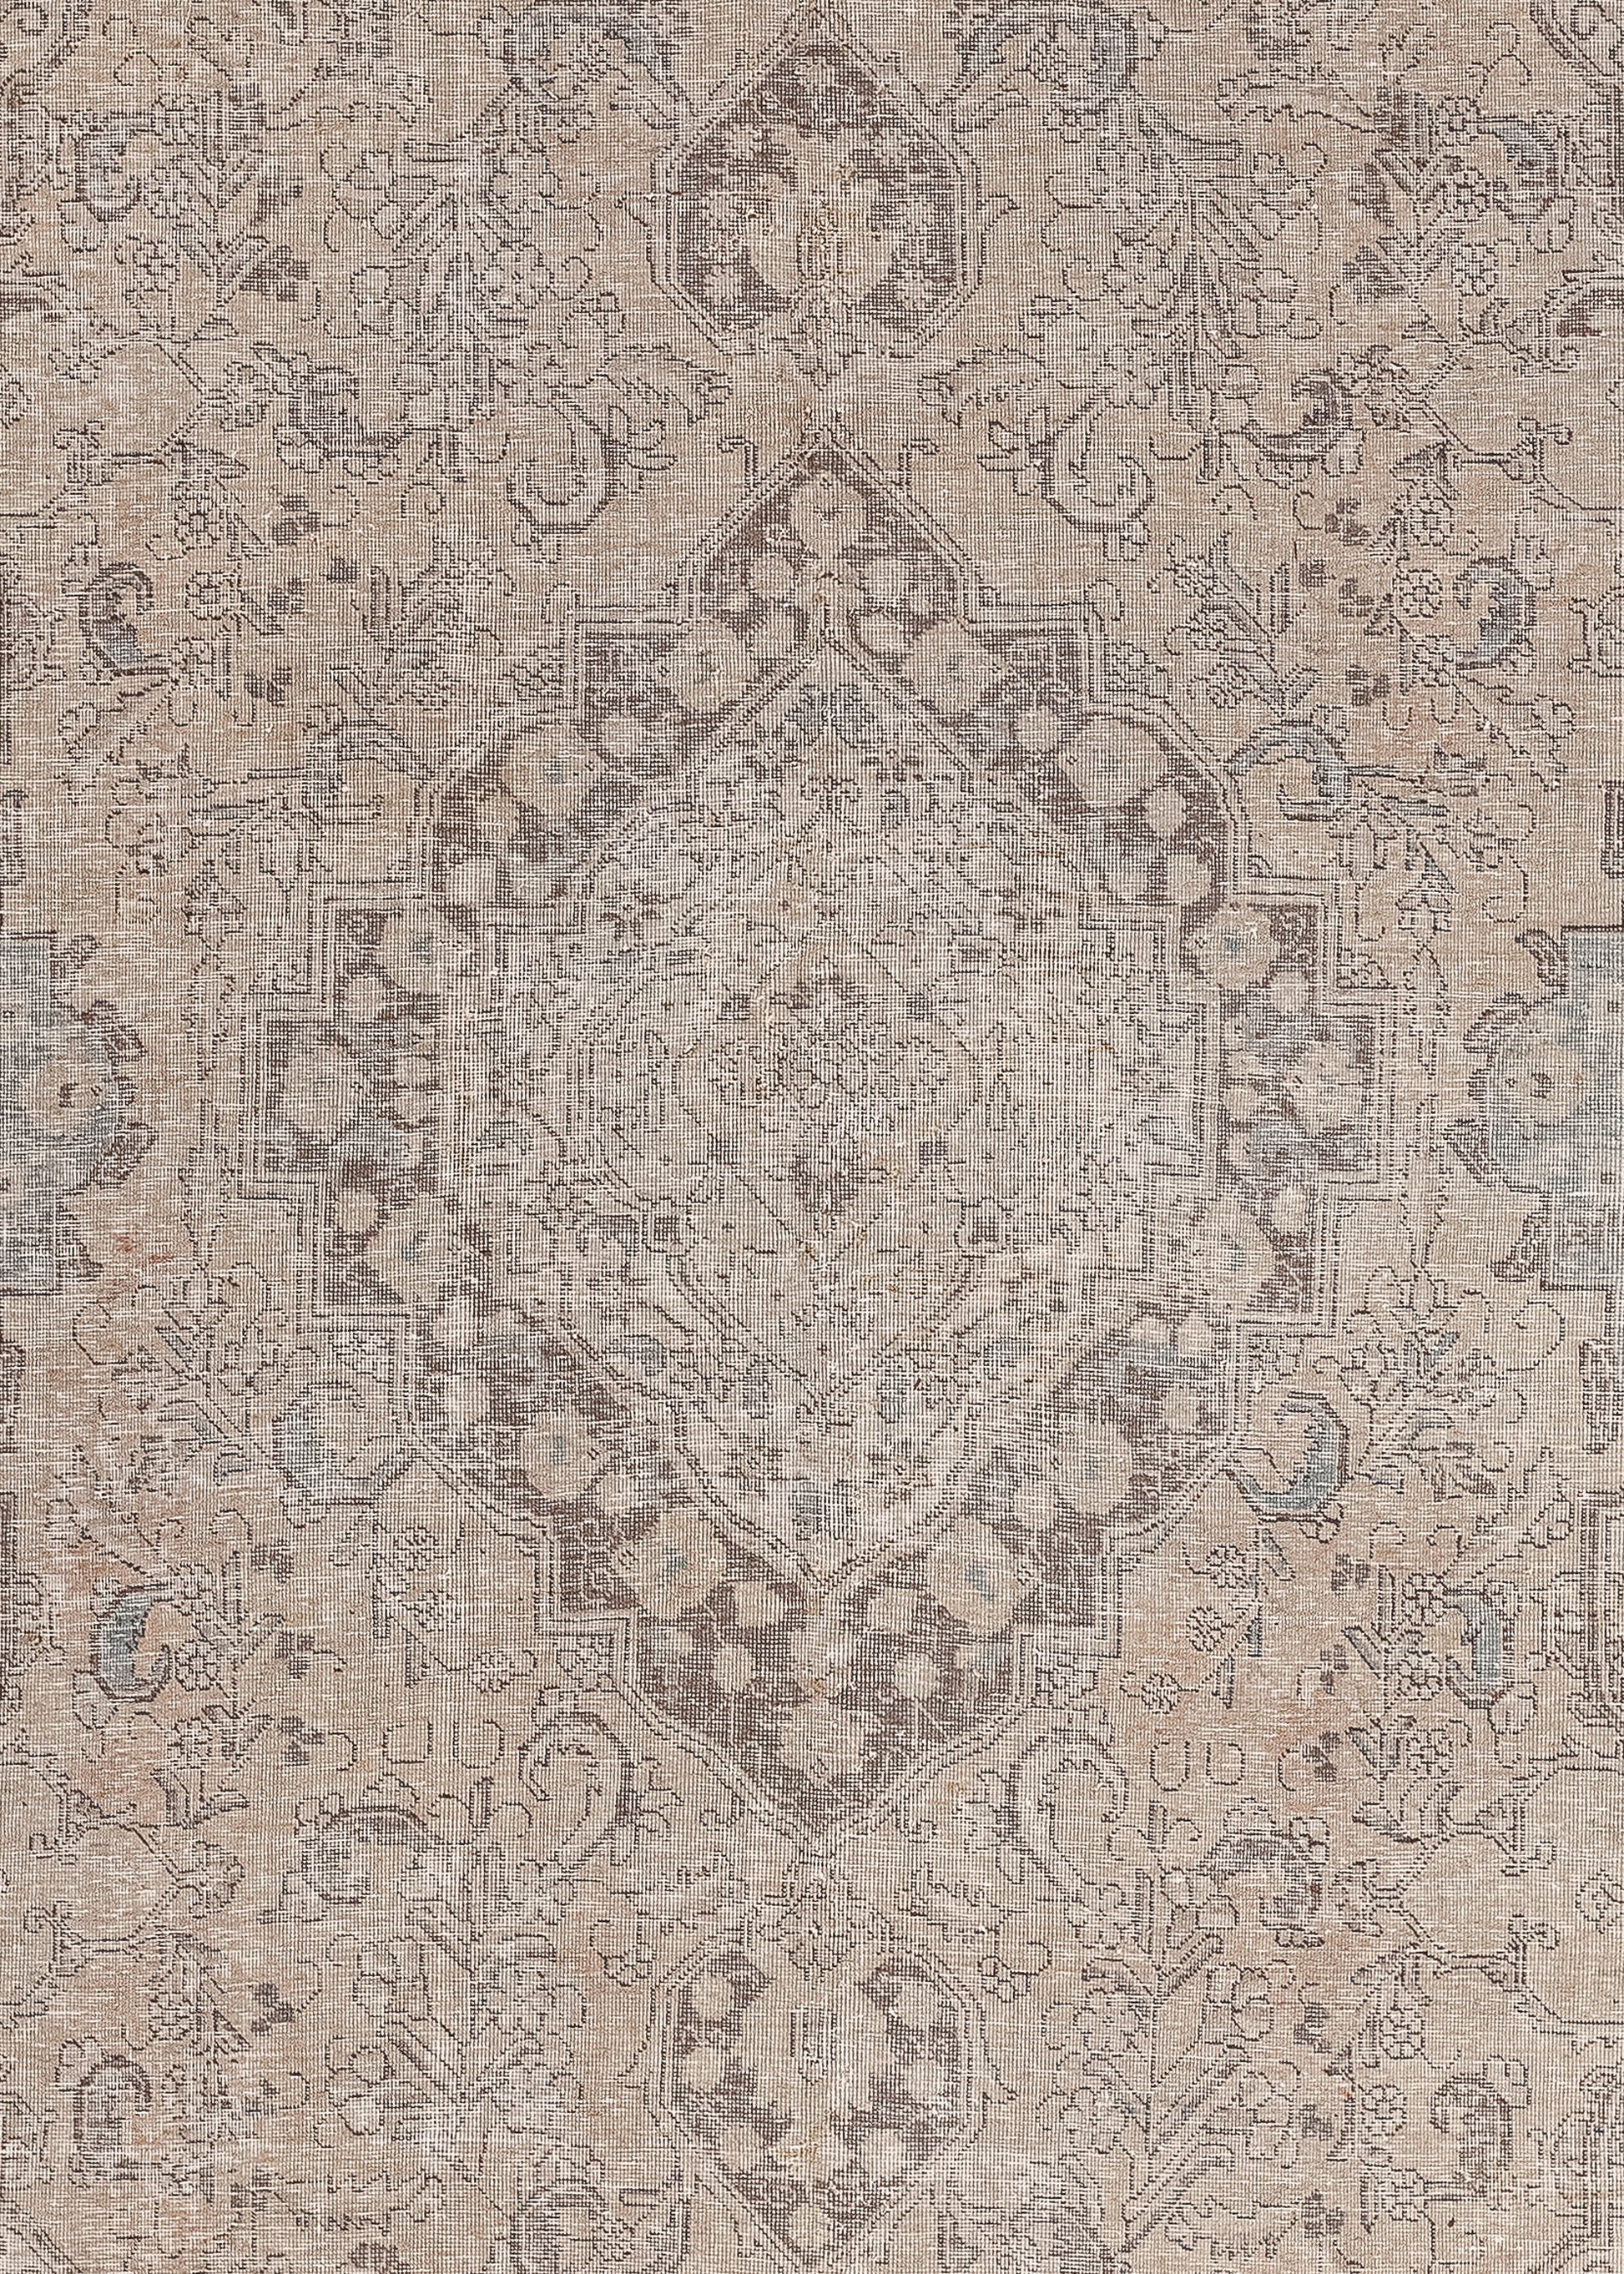 The rug's close-up features a sizable rhombus that has nested ones filled with floral motifs.